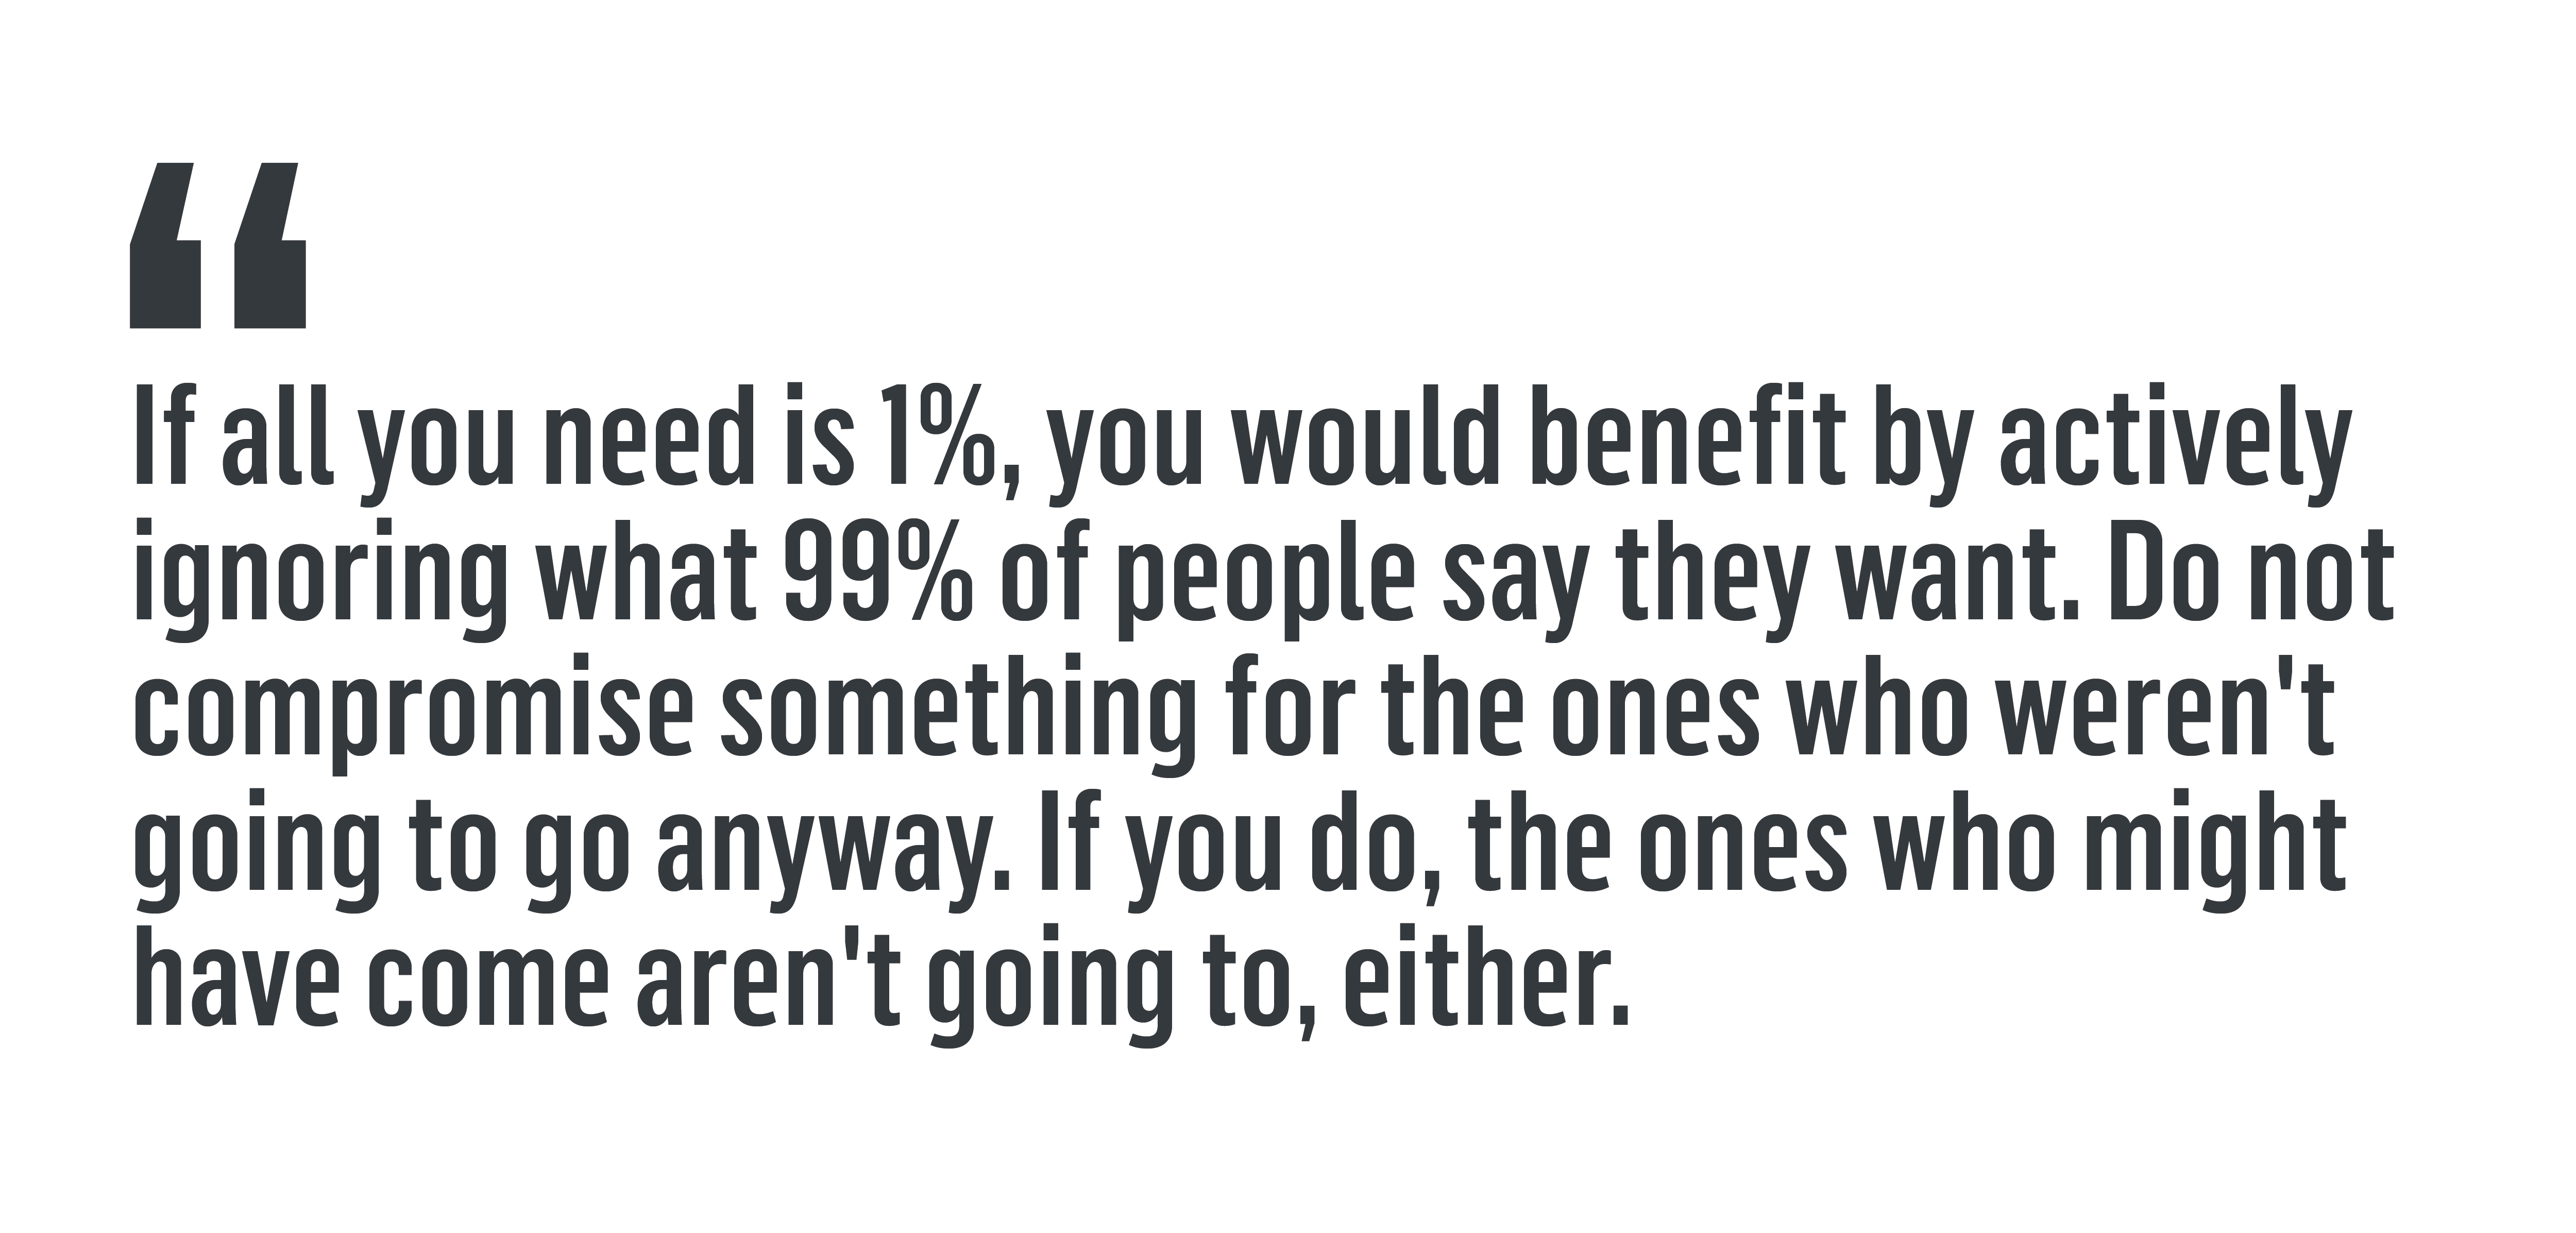 “If all you need is 1%, you would benefit by actively ignoring what 99% of people say they want. Do not compromise something for the ones who weren't going to go anyway. If you do, the ones who might have come aren't going to, either.”